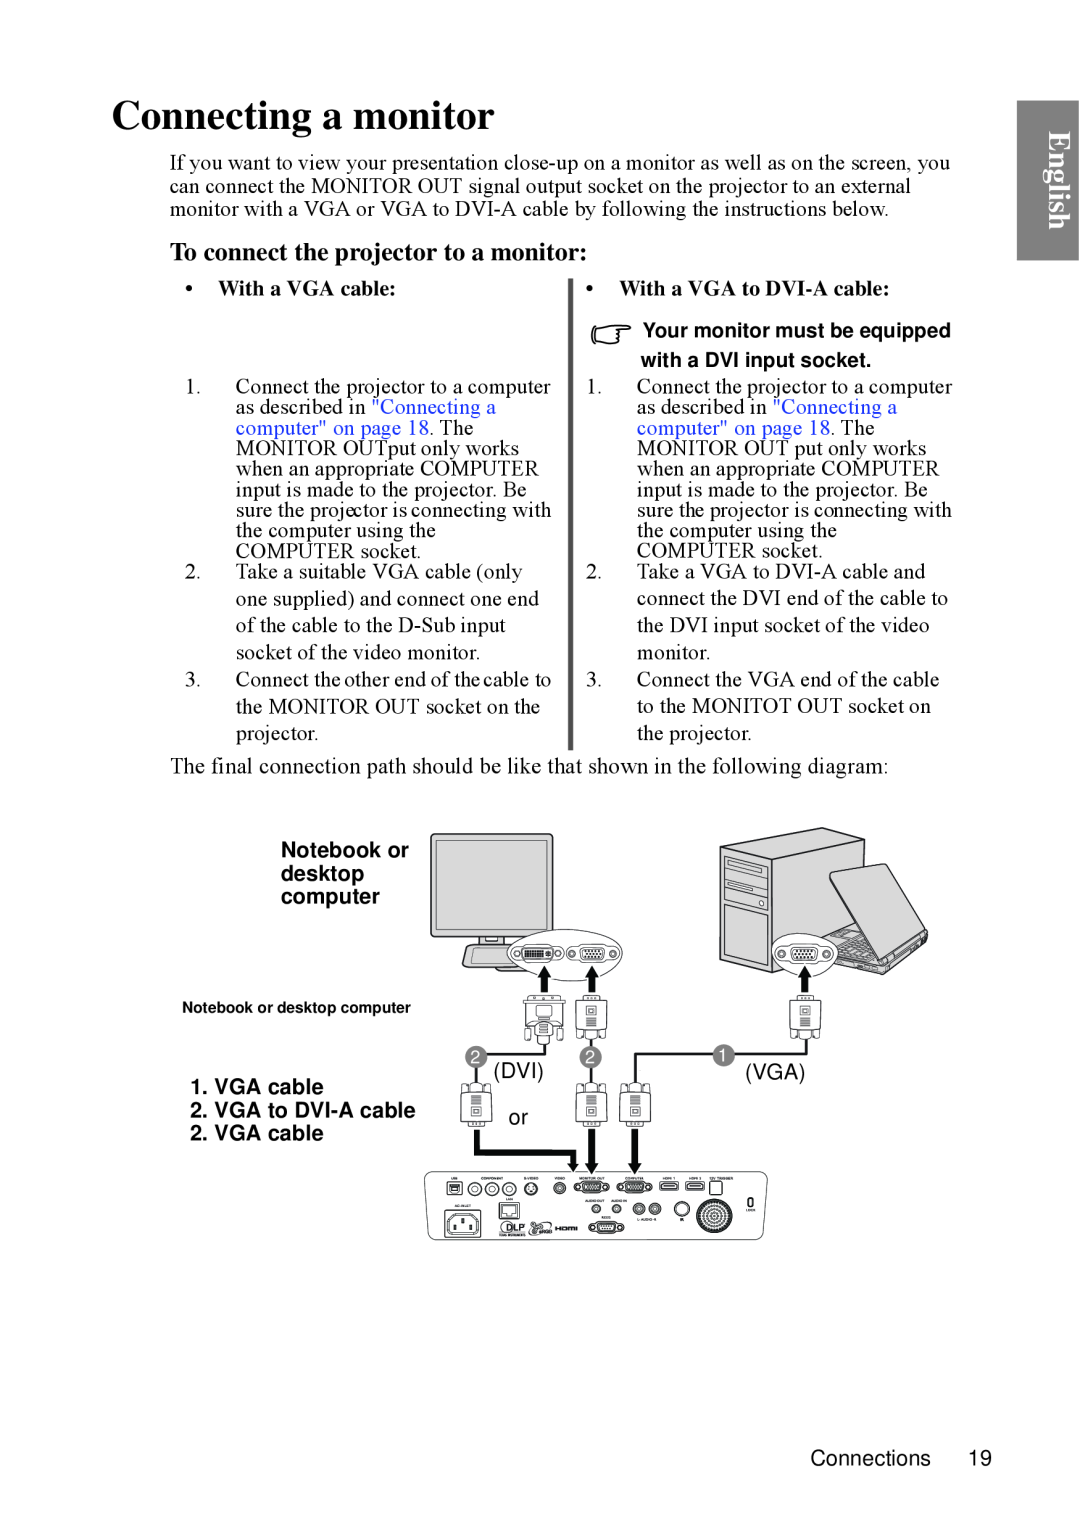 BenQ SP840 user manual Connecting a monitor, To connect the projector to a monitor, English, computer on page 18 . The 